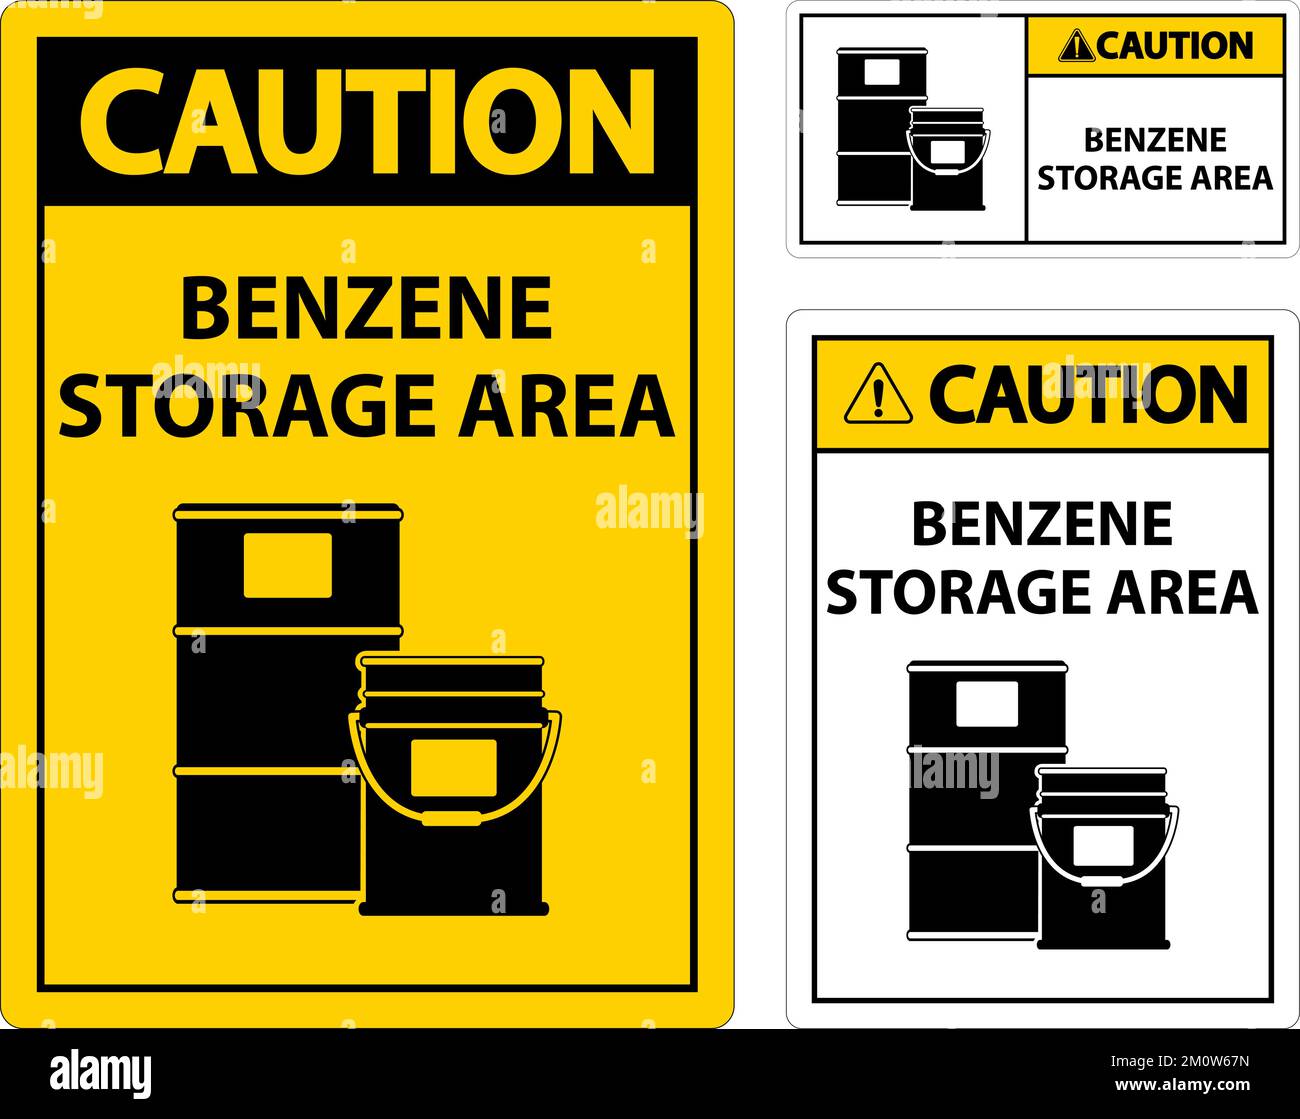 Caution Benzene Storage Area Sign On White Background Stock Vector